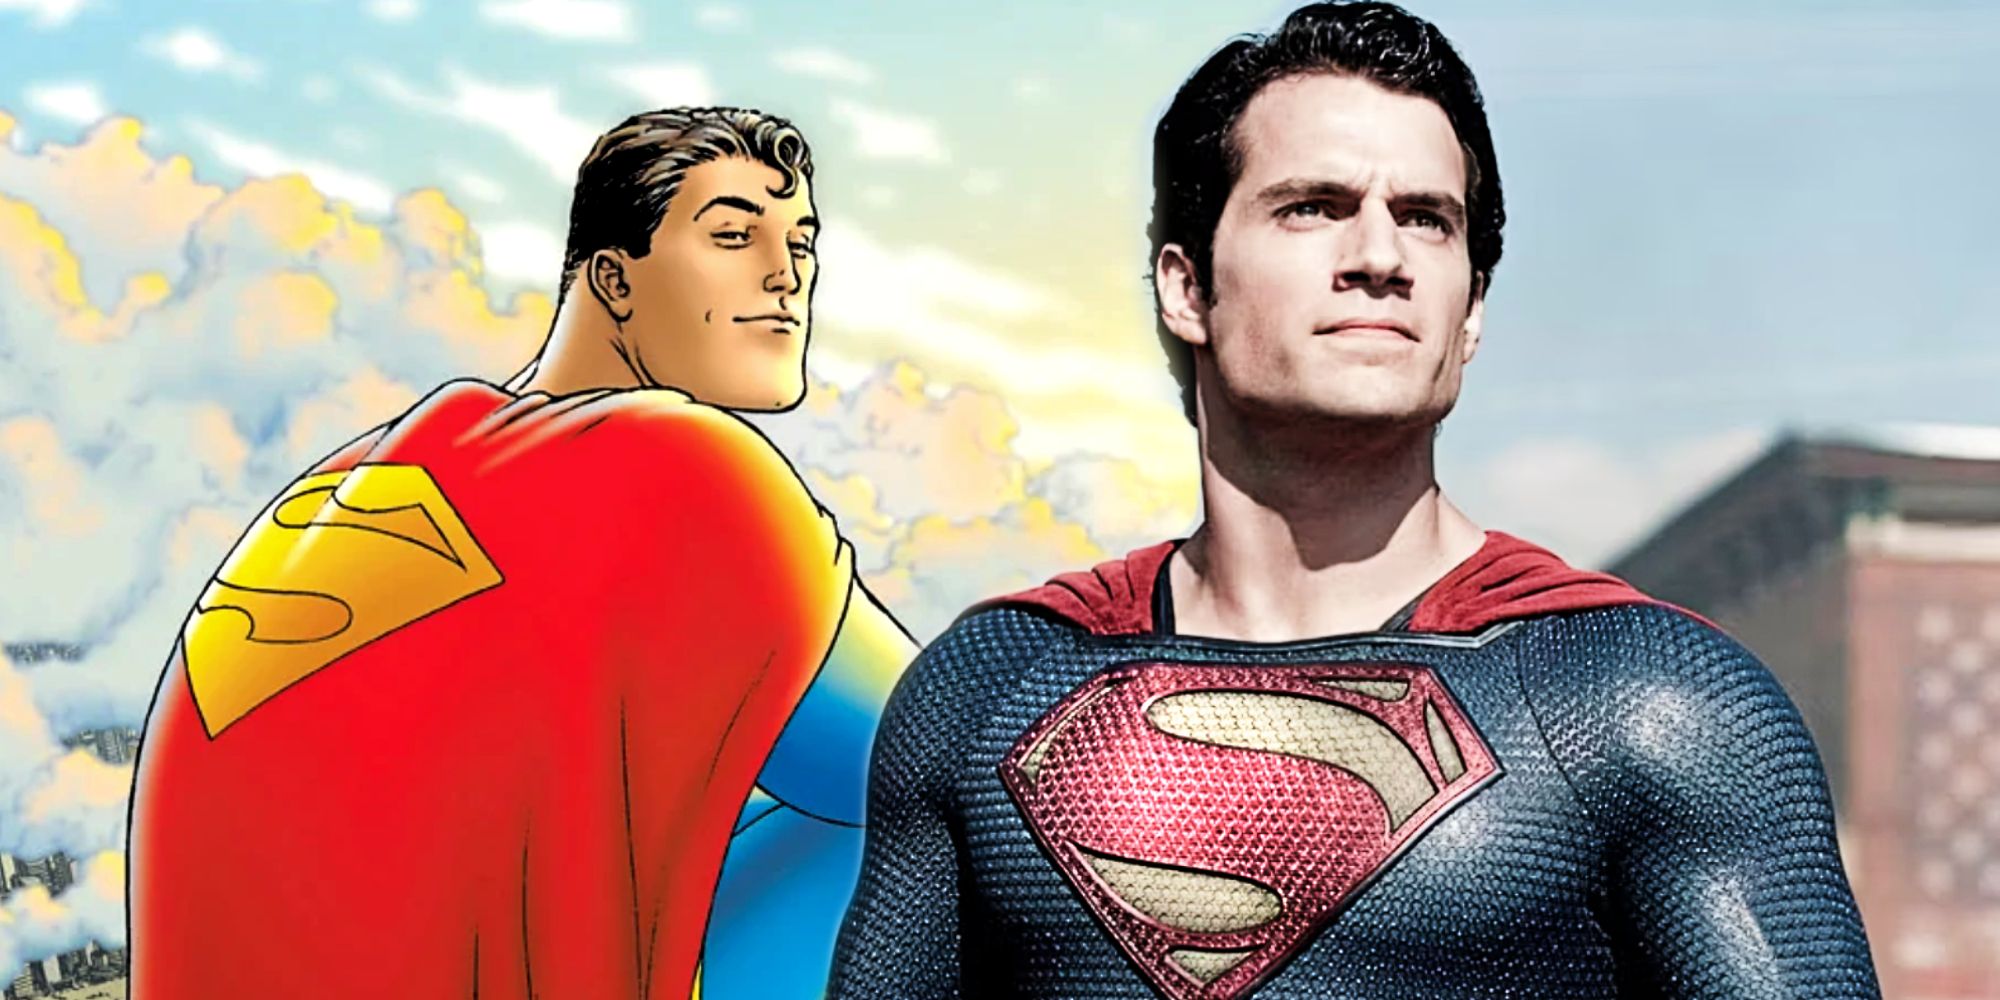 Henry Cavill's Man of Steel and All-Star Superman